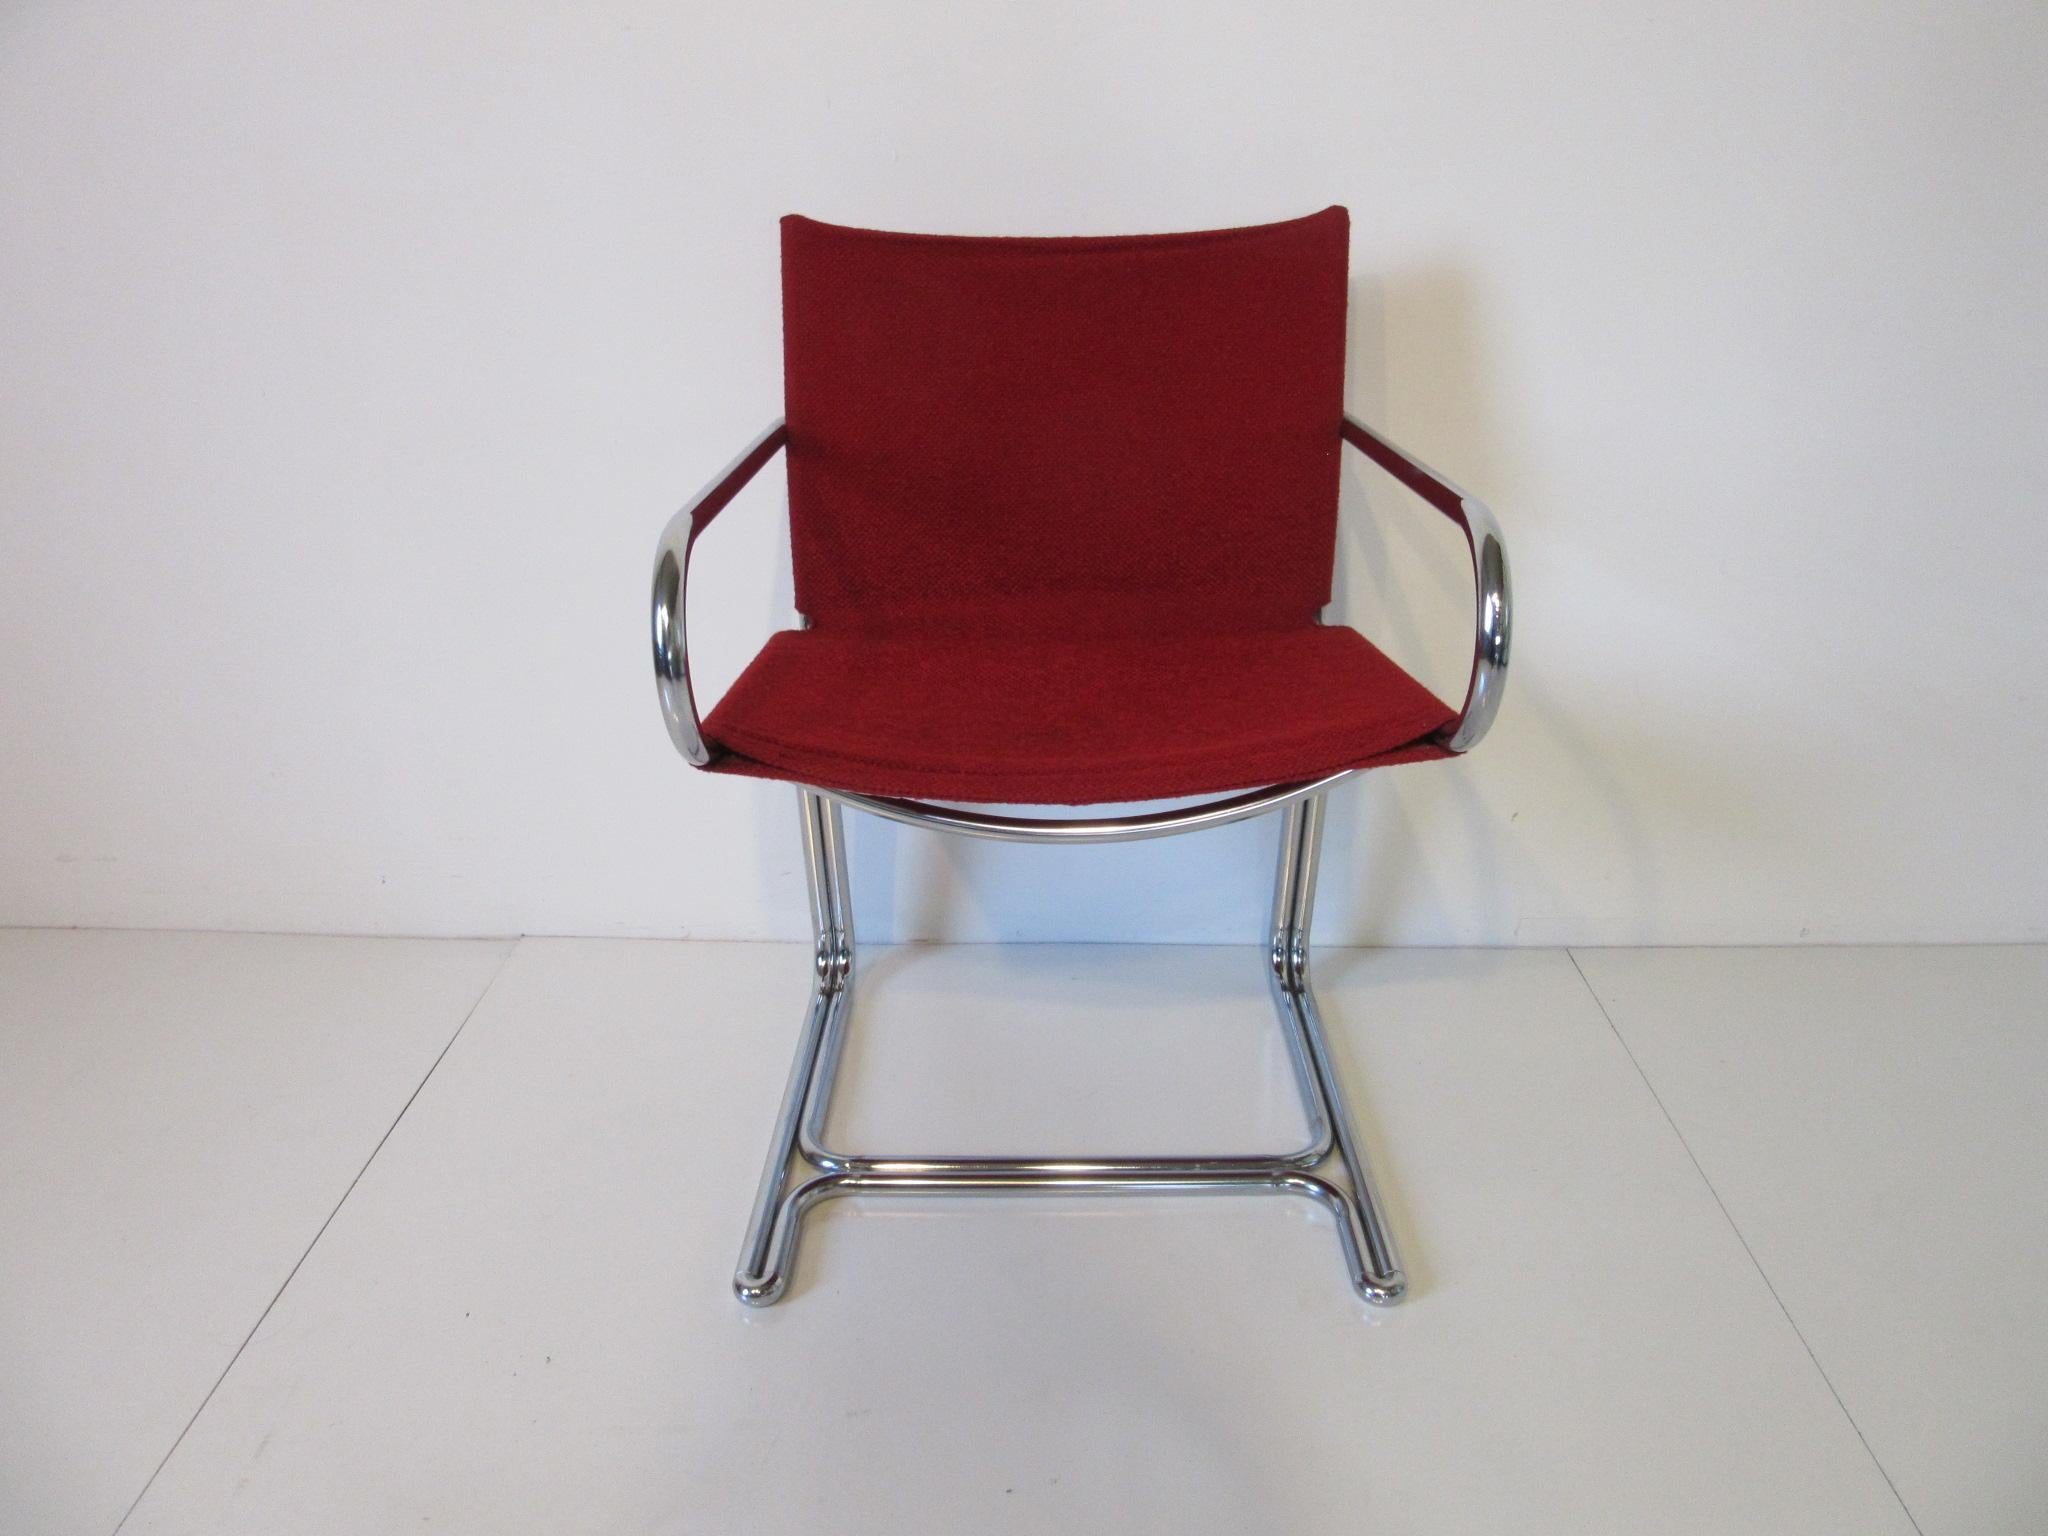 A set of four red upholstered sling style cantilevered arm chairs with bent tubular chrome frames, comfortable and compact from the 1970s. Can be used in the dining room, game room or business environment in the manner of Marcel Breuer.